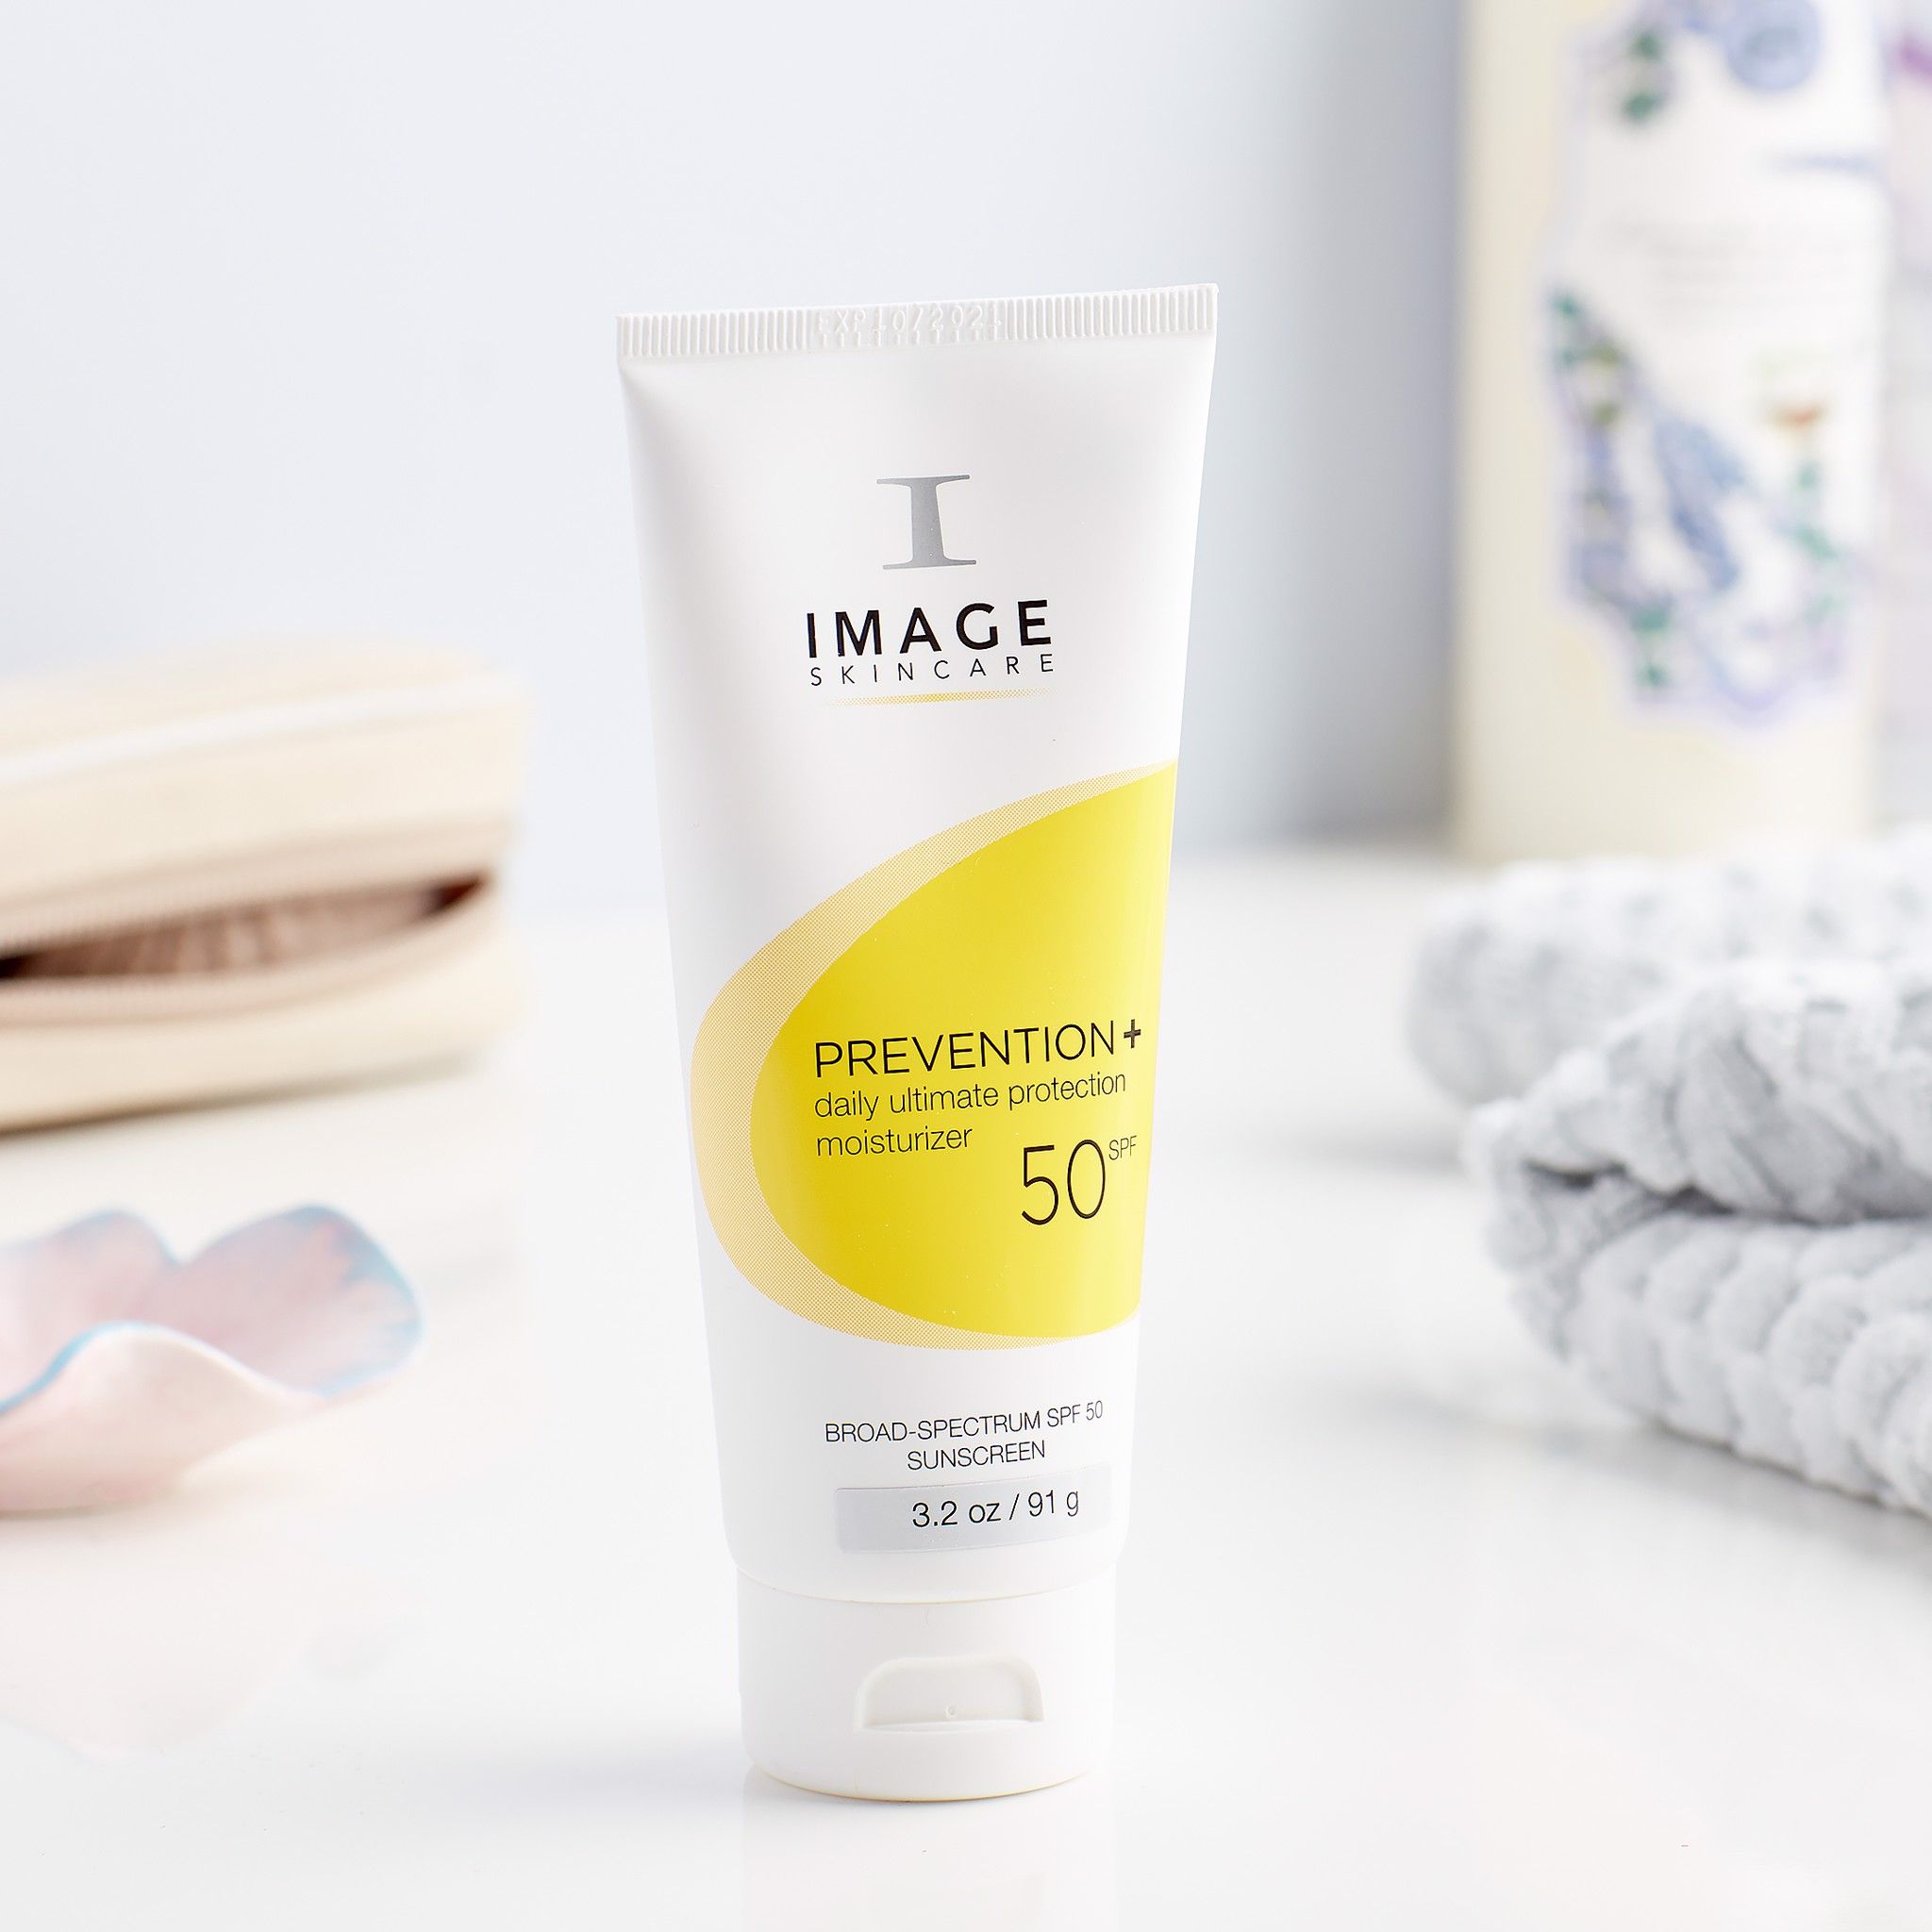  Kem chống nắng Image Skincare Prevention Daily Ultimate Protection Moisturizer SPF 50 